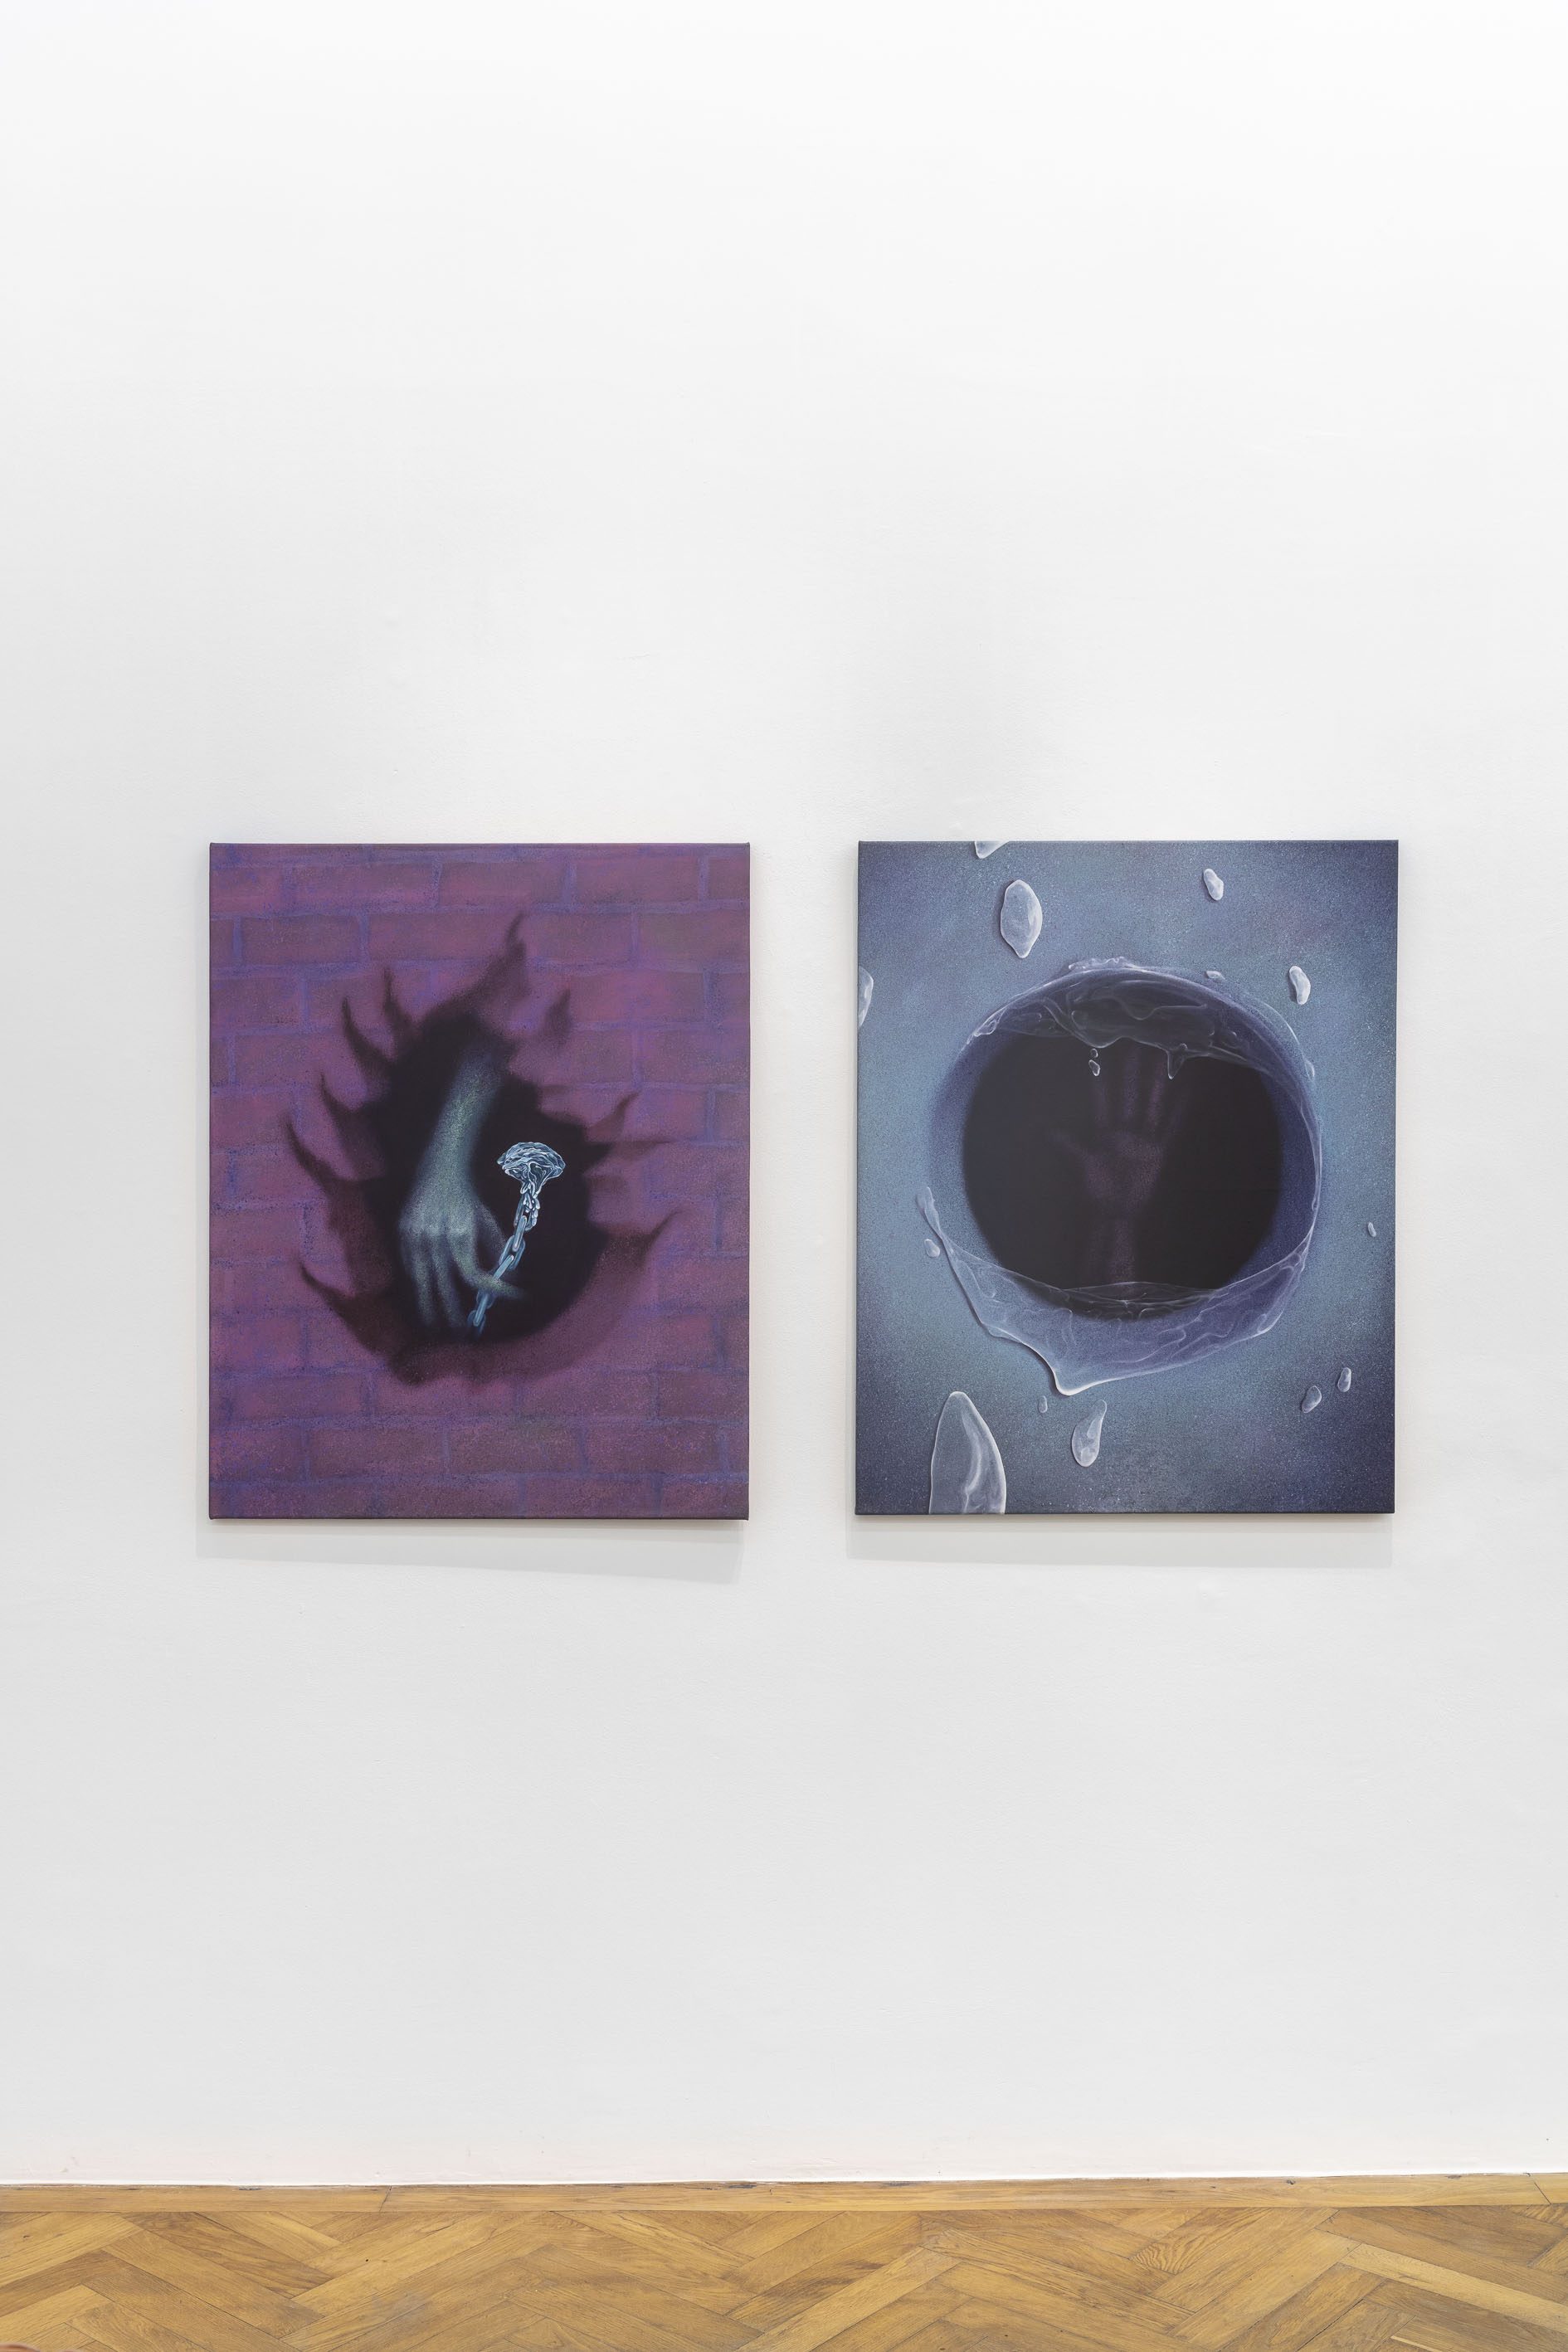 Ádám Horváth, left: A Warm Gesture from a Cold Hand, right: That Act Sublime, each 2019, acrylic on canvas, 100 × 80 cm